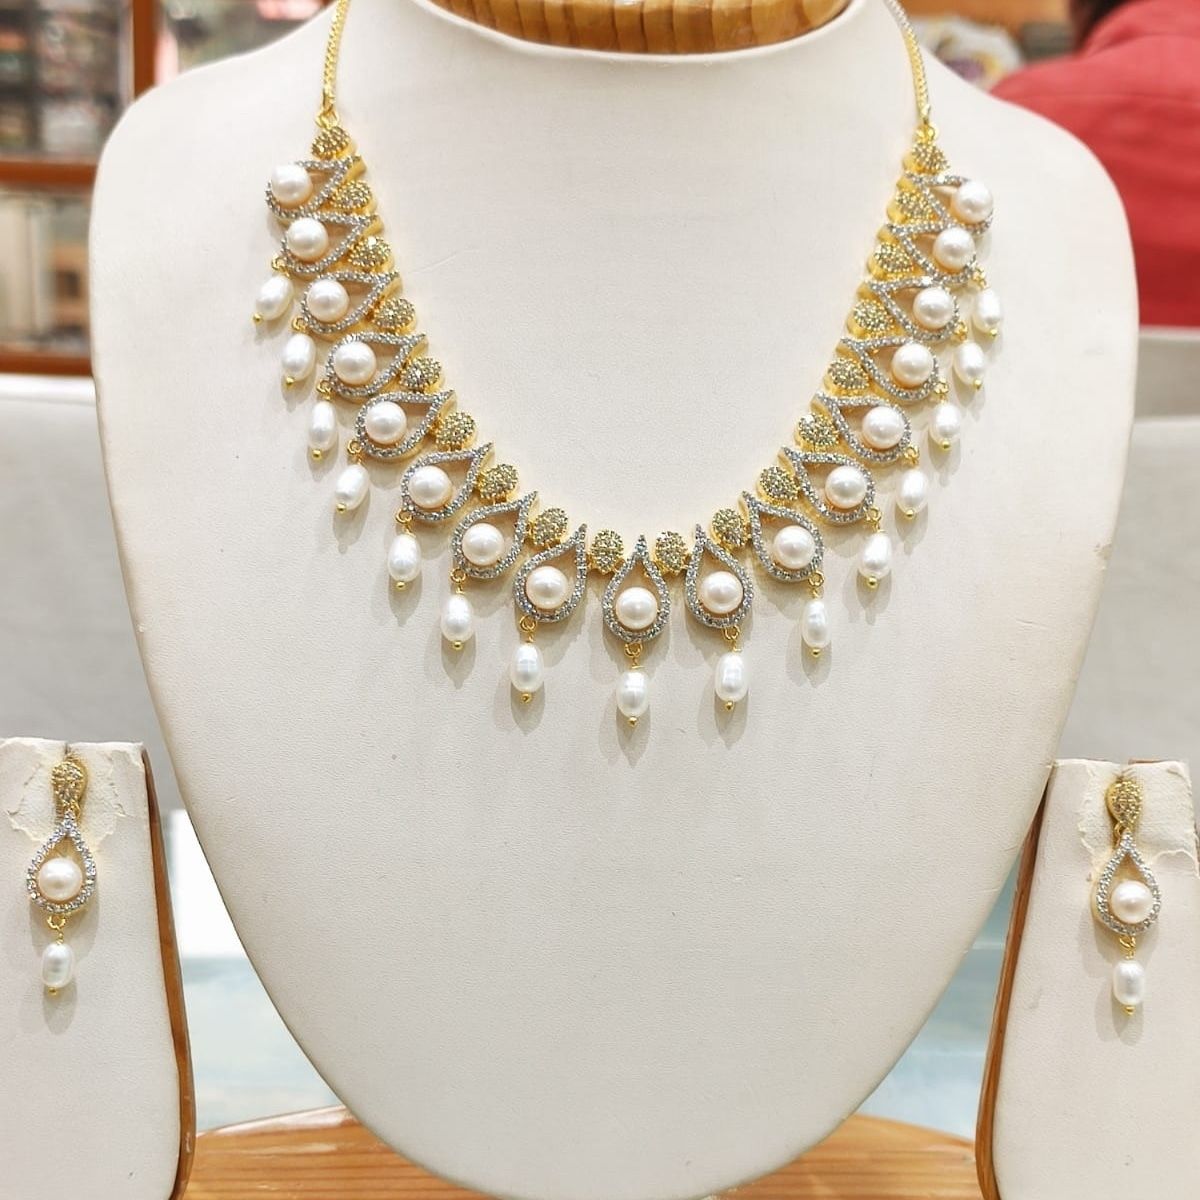 S&W Pearl Necklace Vintage White Faux Pearls Retro Adjustable | eBay